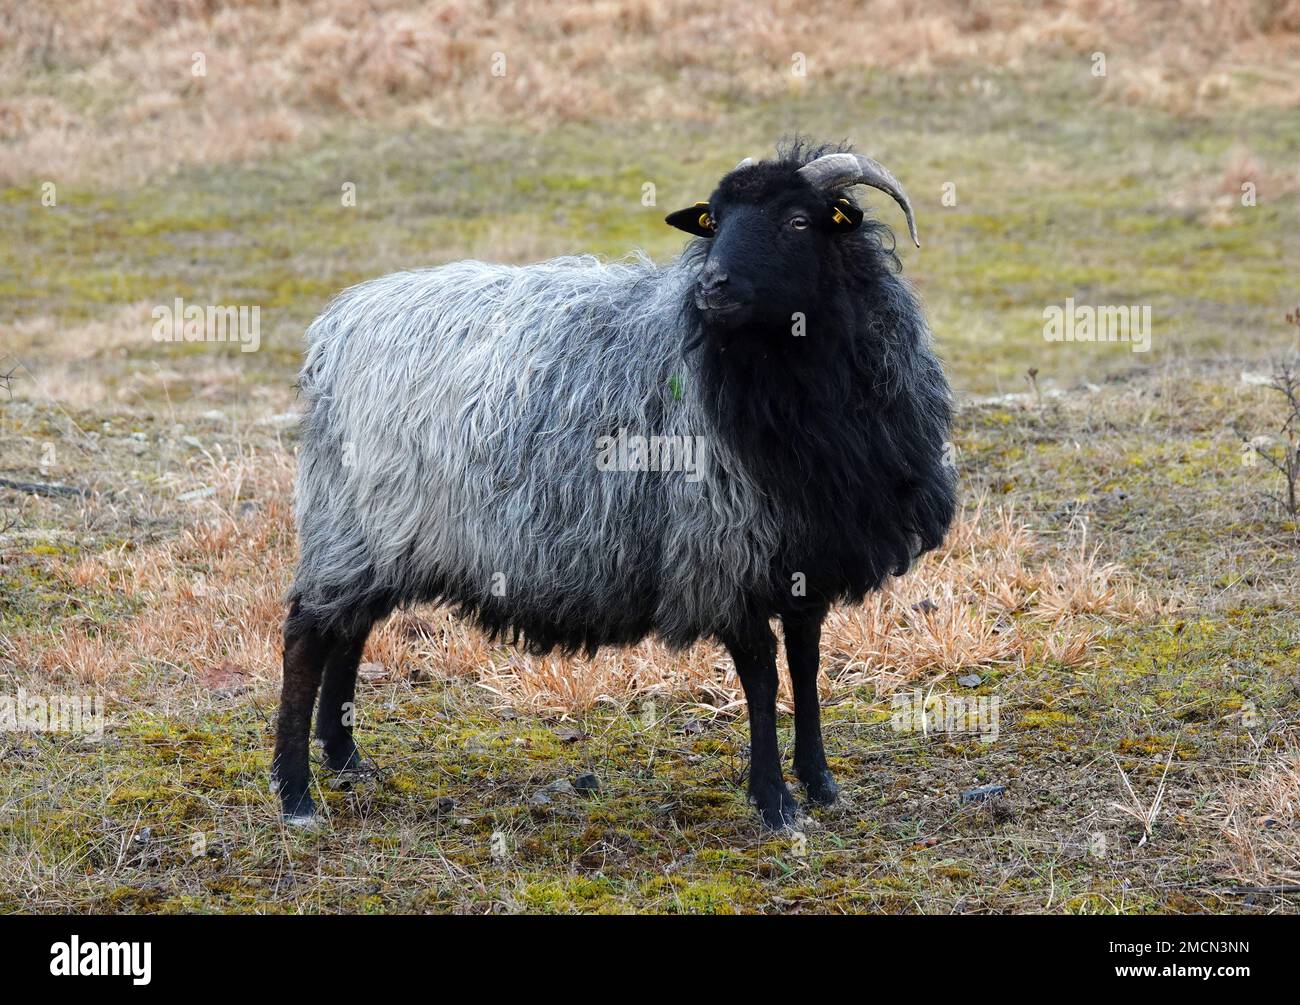 German Grey Heath sheep stands in a wild environment. The German name of this breed is Heidschnucke. This is a Northern European short-tailed sheep wi Stock Photo